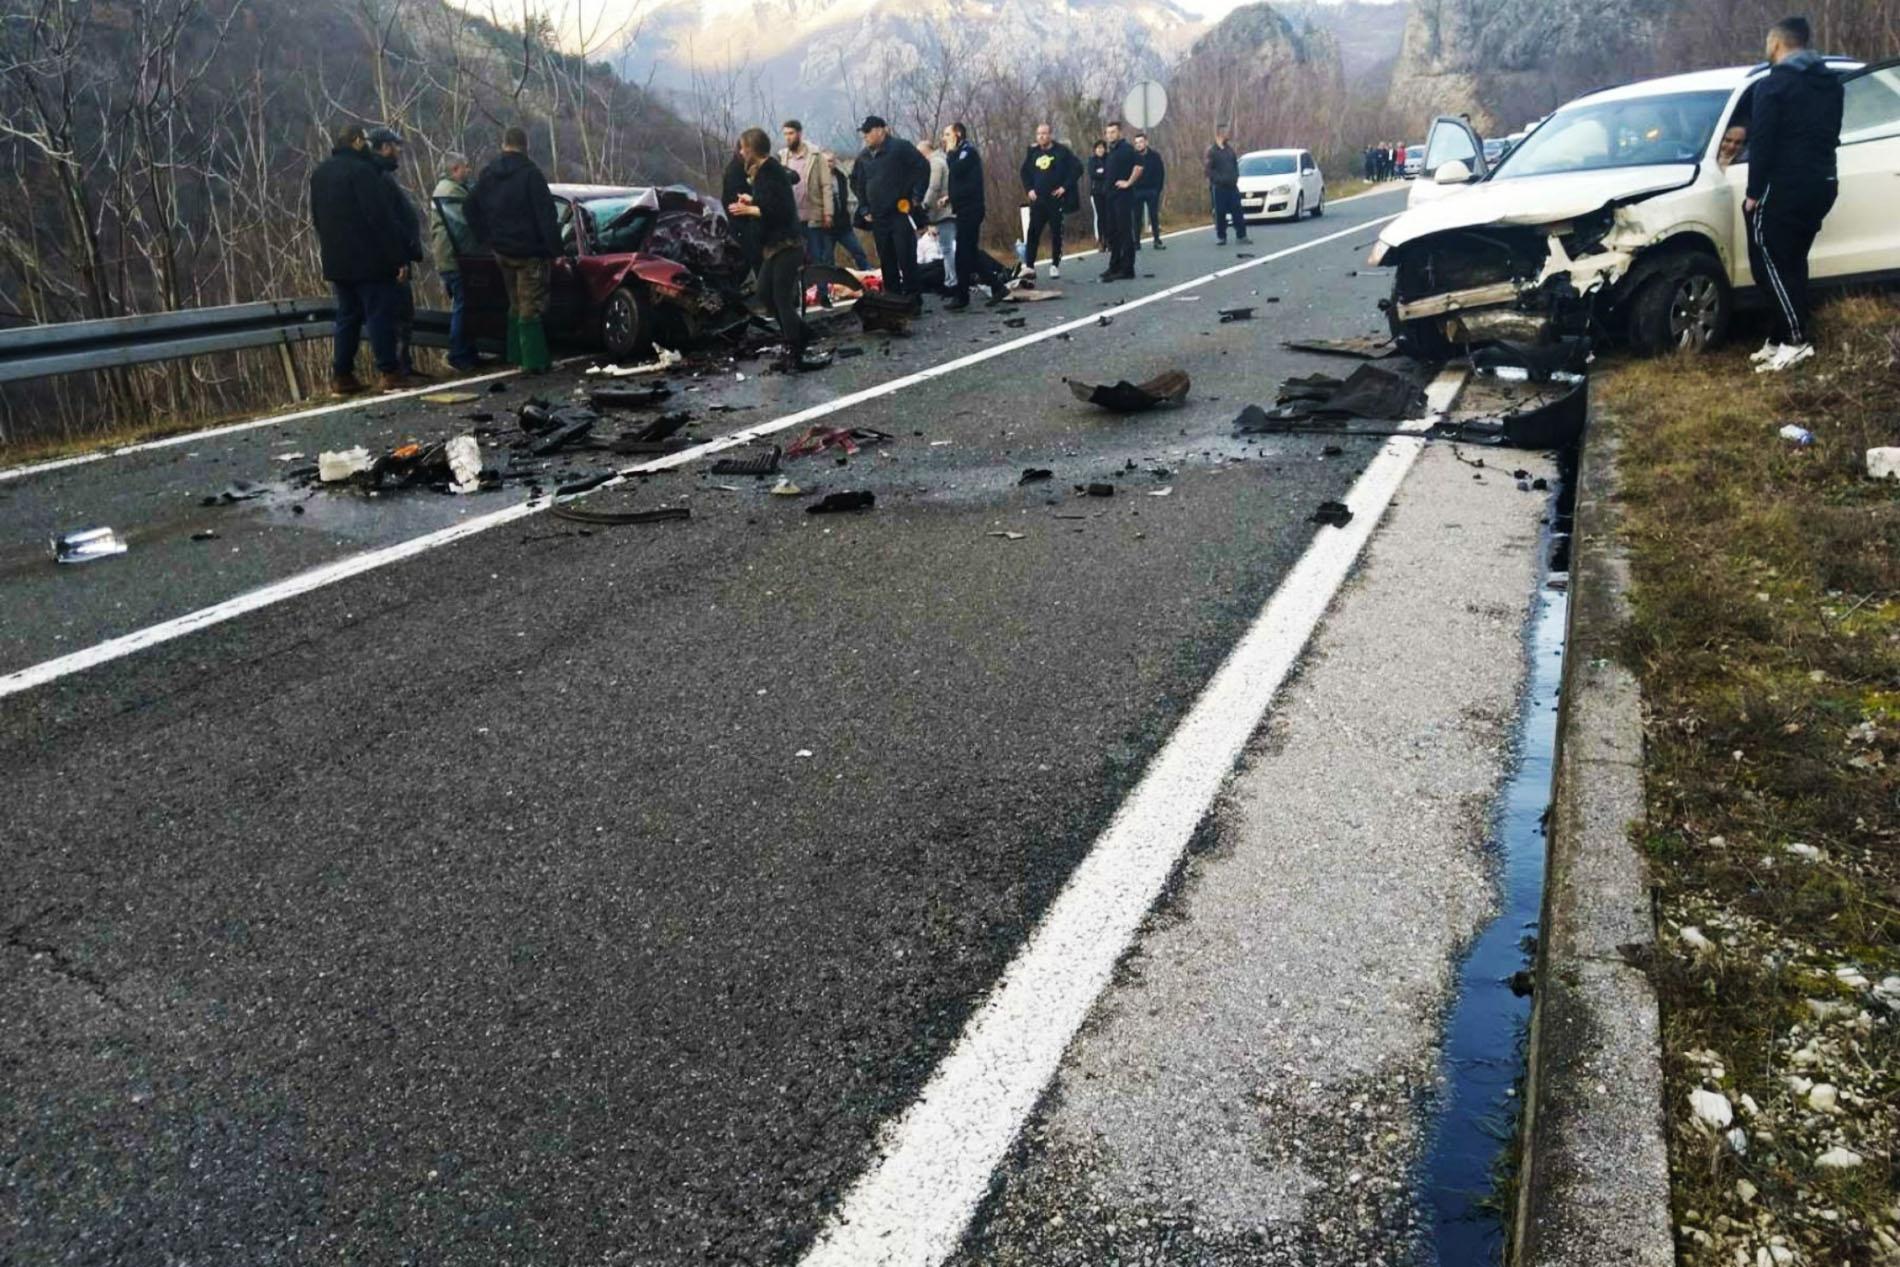 Terrible accident in Grabovica near Mostar, two killed